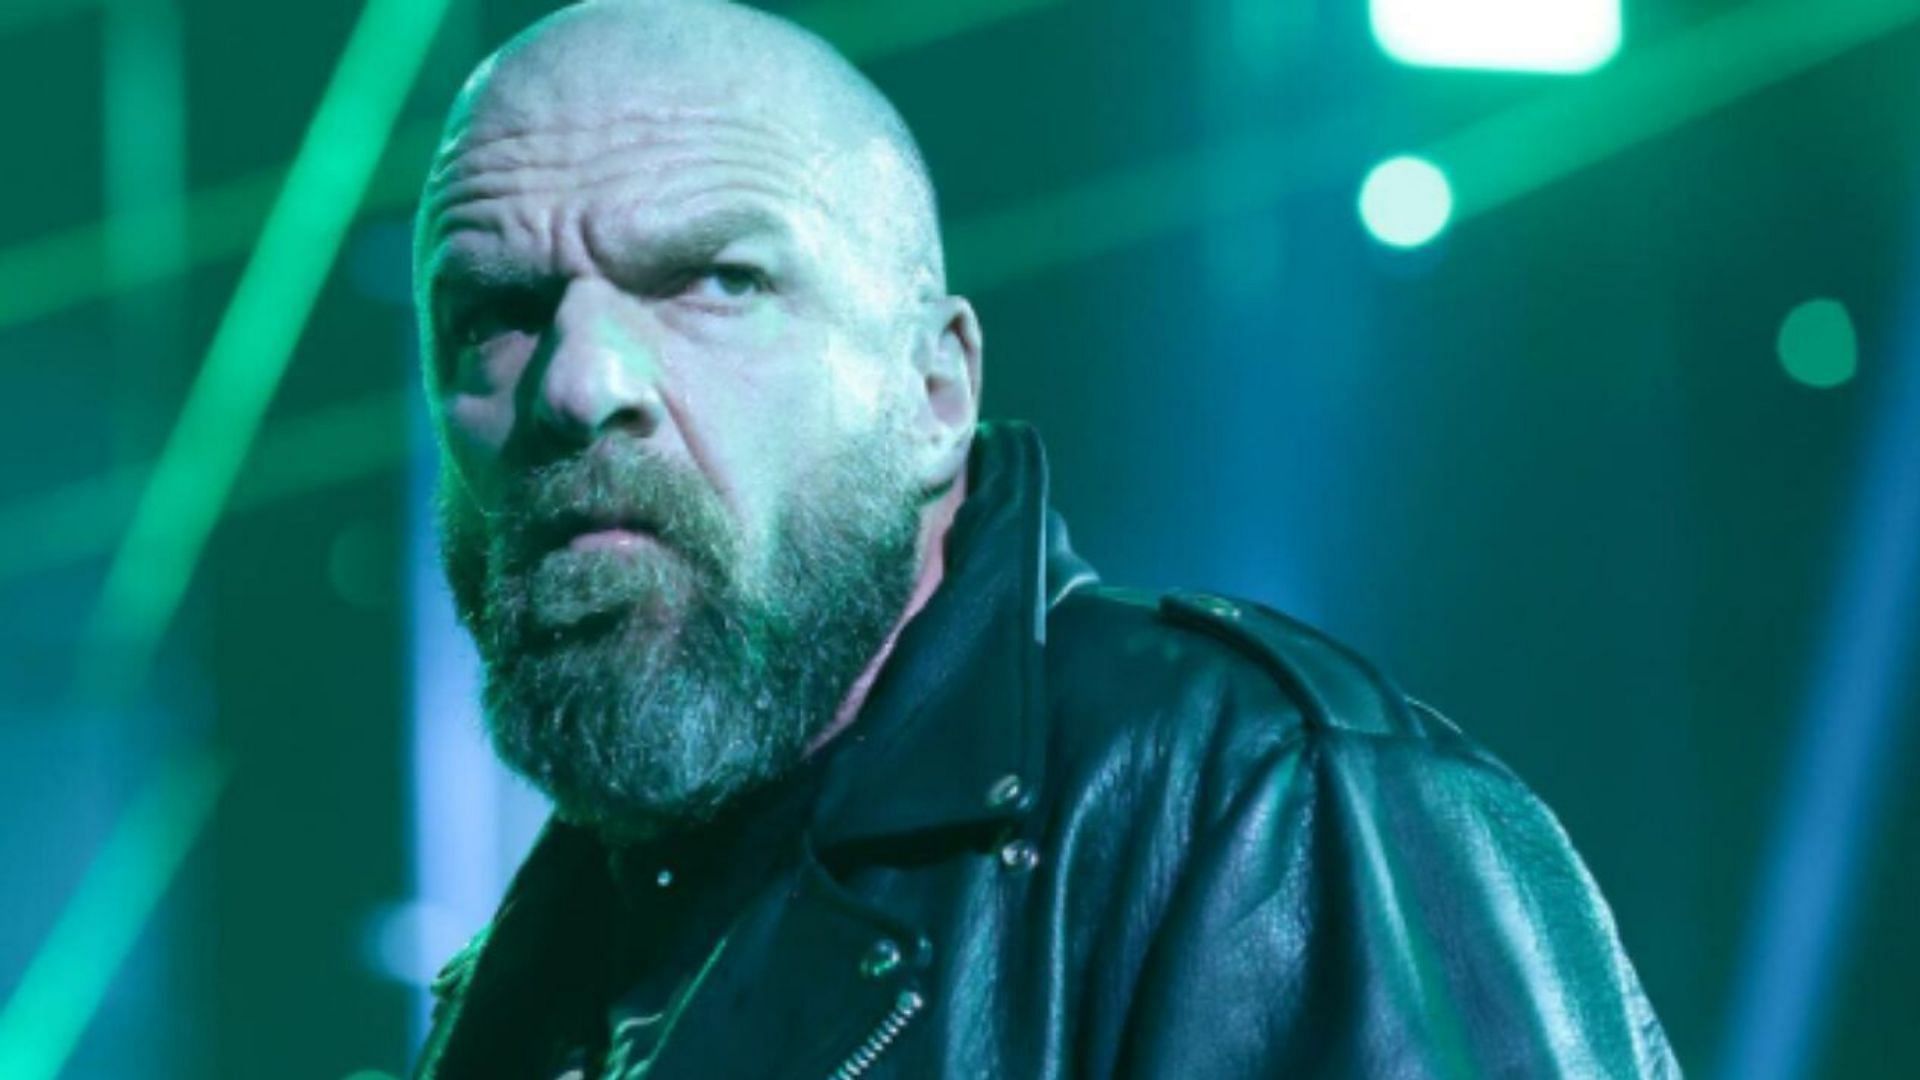 Triple H has become an important influence in WWE